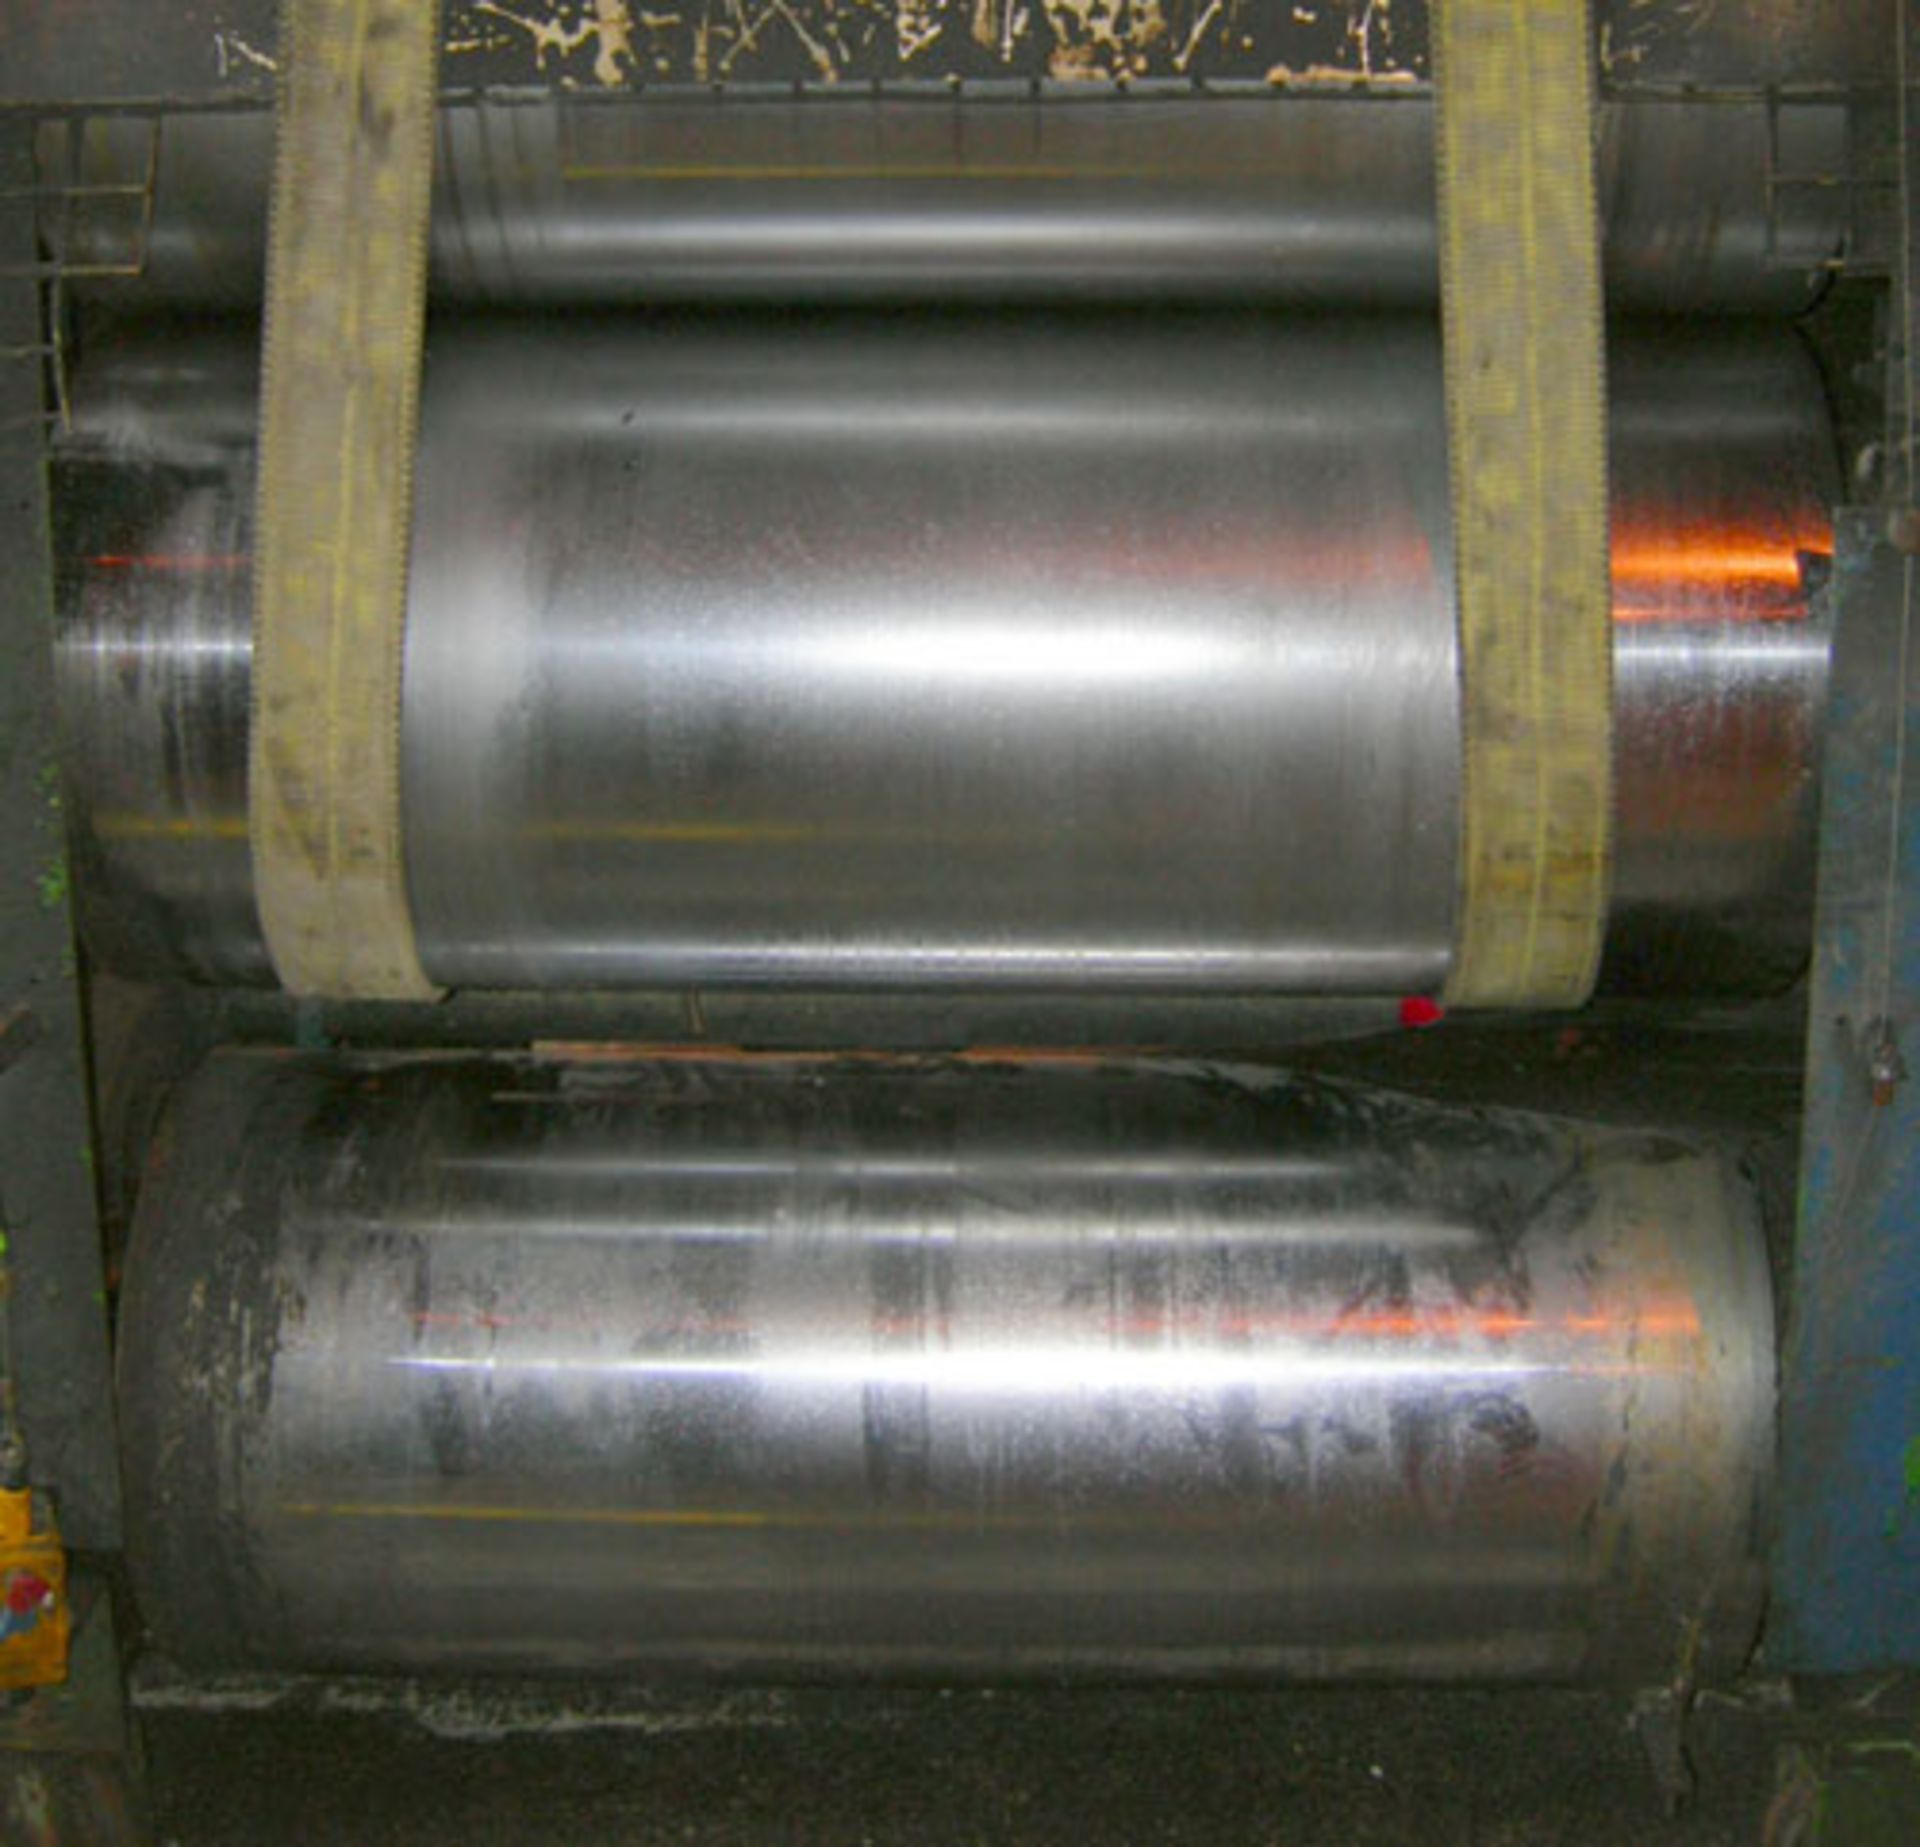 OMV 3-Roll Sheet Stack - Image 23 of 30